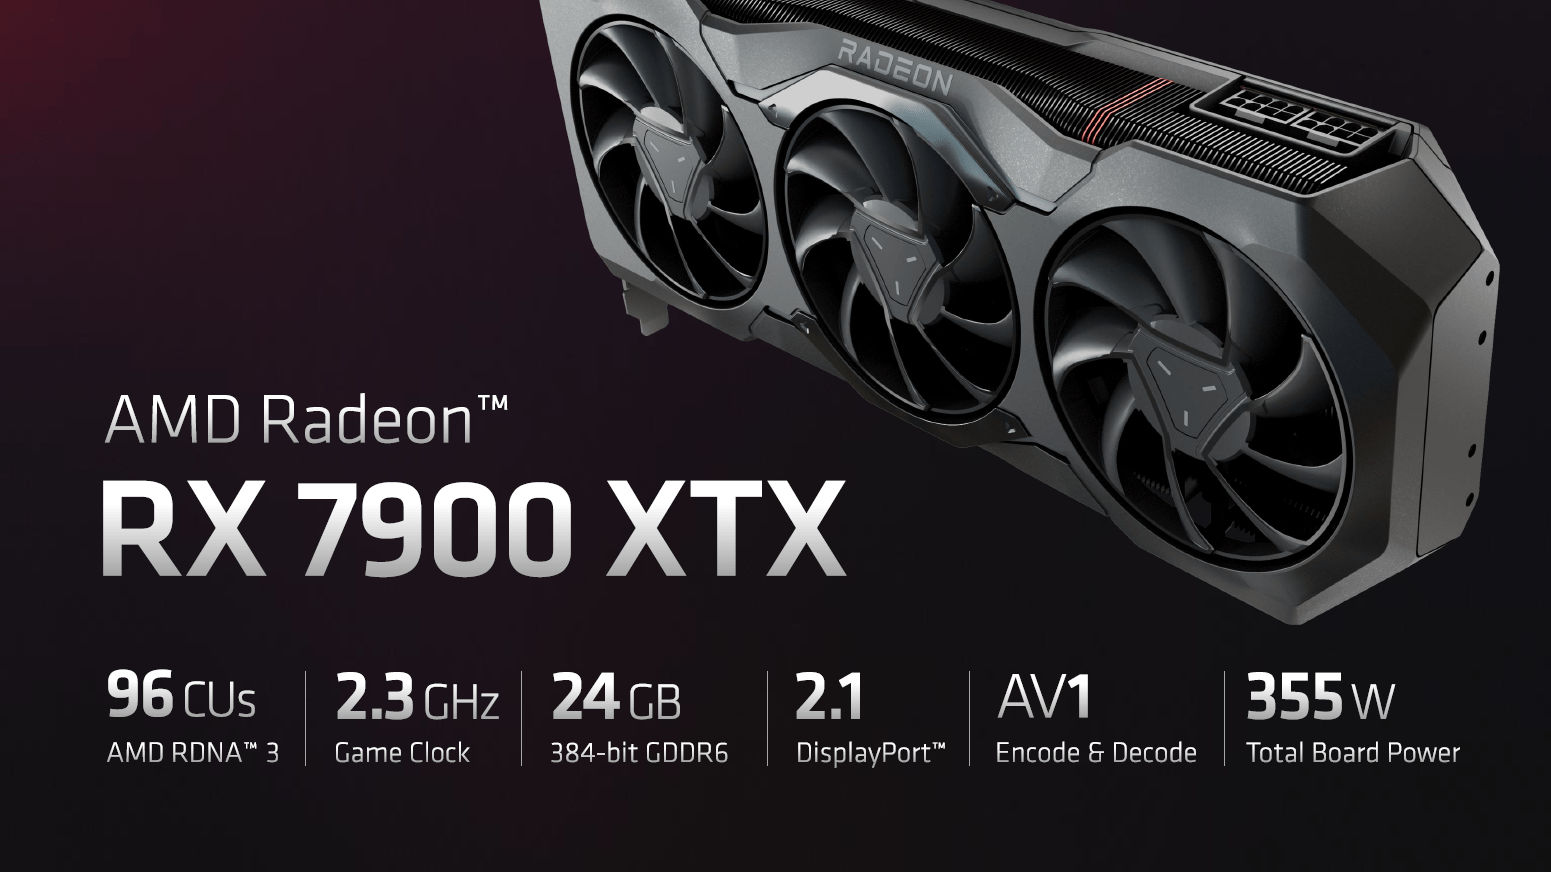 Info slide from AMD's presentation showing statistics about the Radeon RX 7900 XTX.